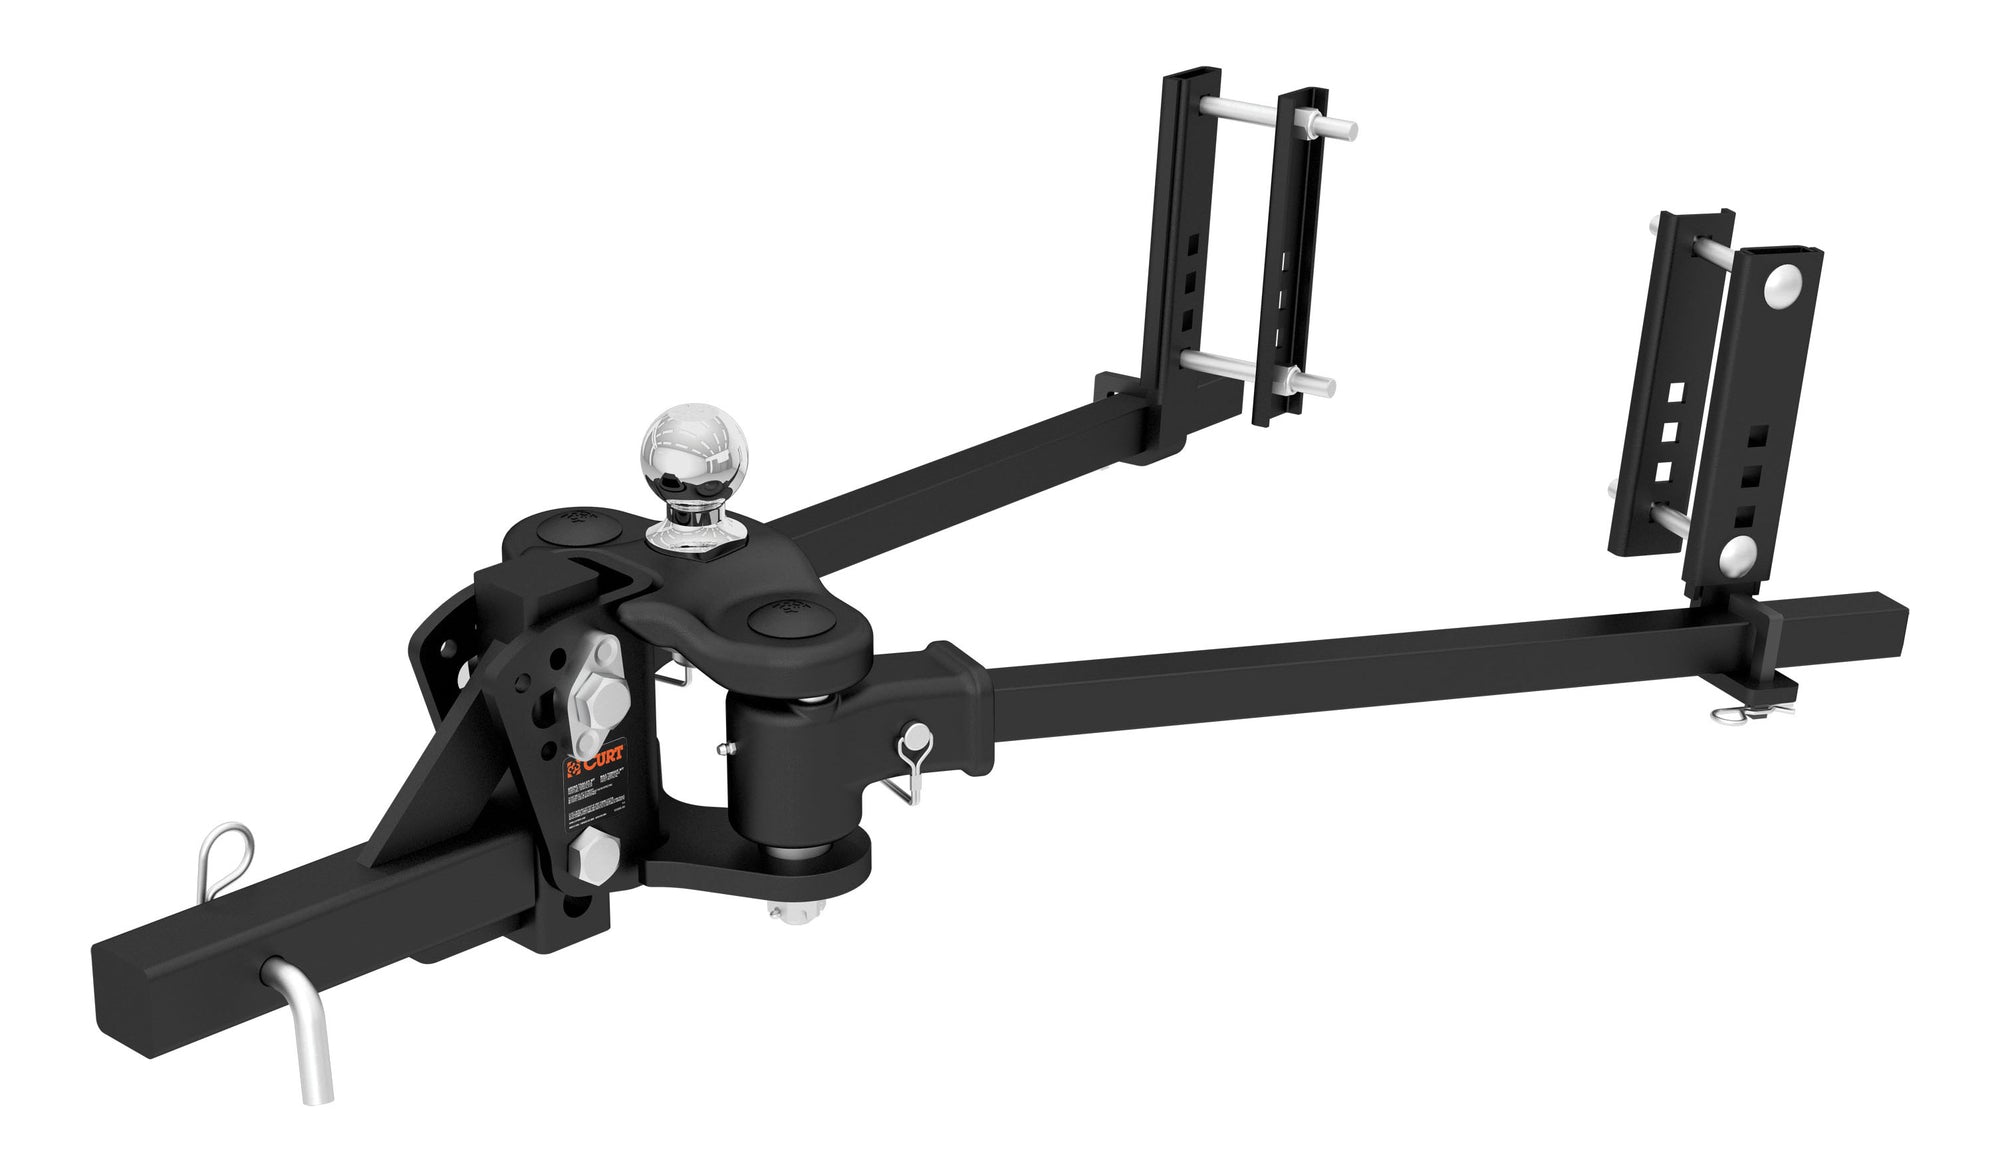 CURT 17500 TruTrack Weight Distribution Hitch with Sway Control - 2" Shank, 2-5/16" Ball, Up to 10,000 lbs.